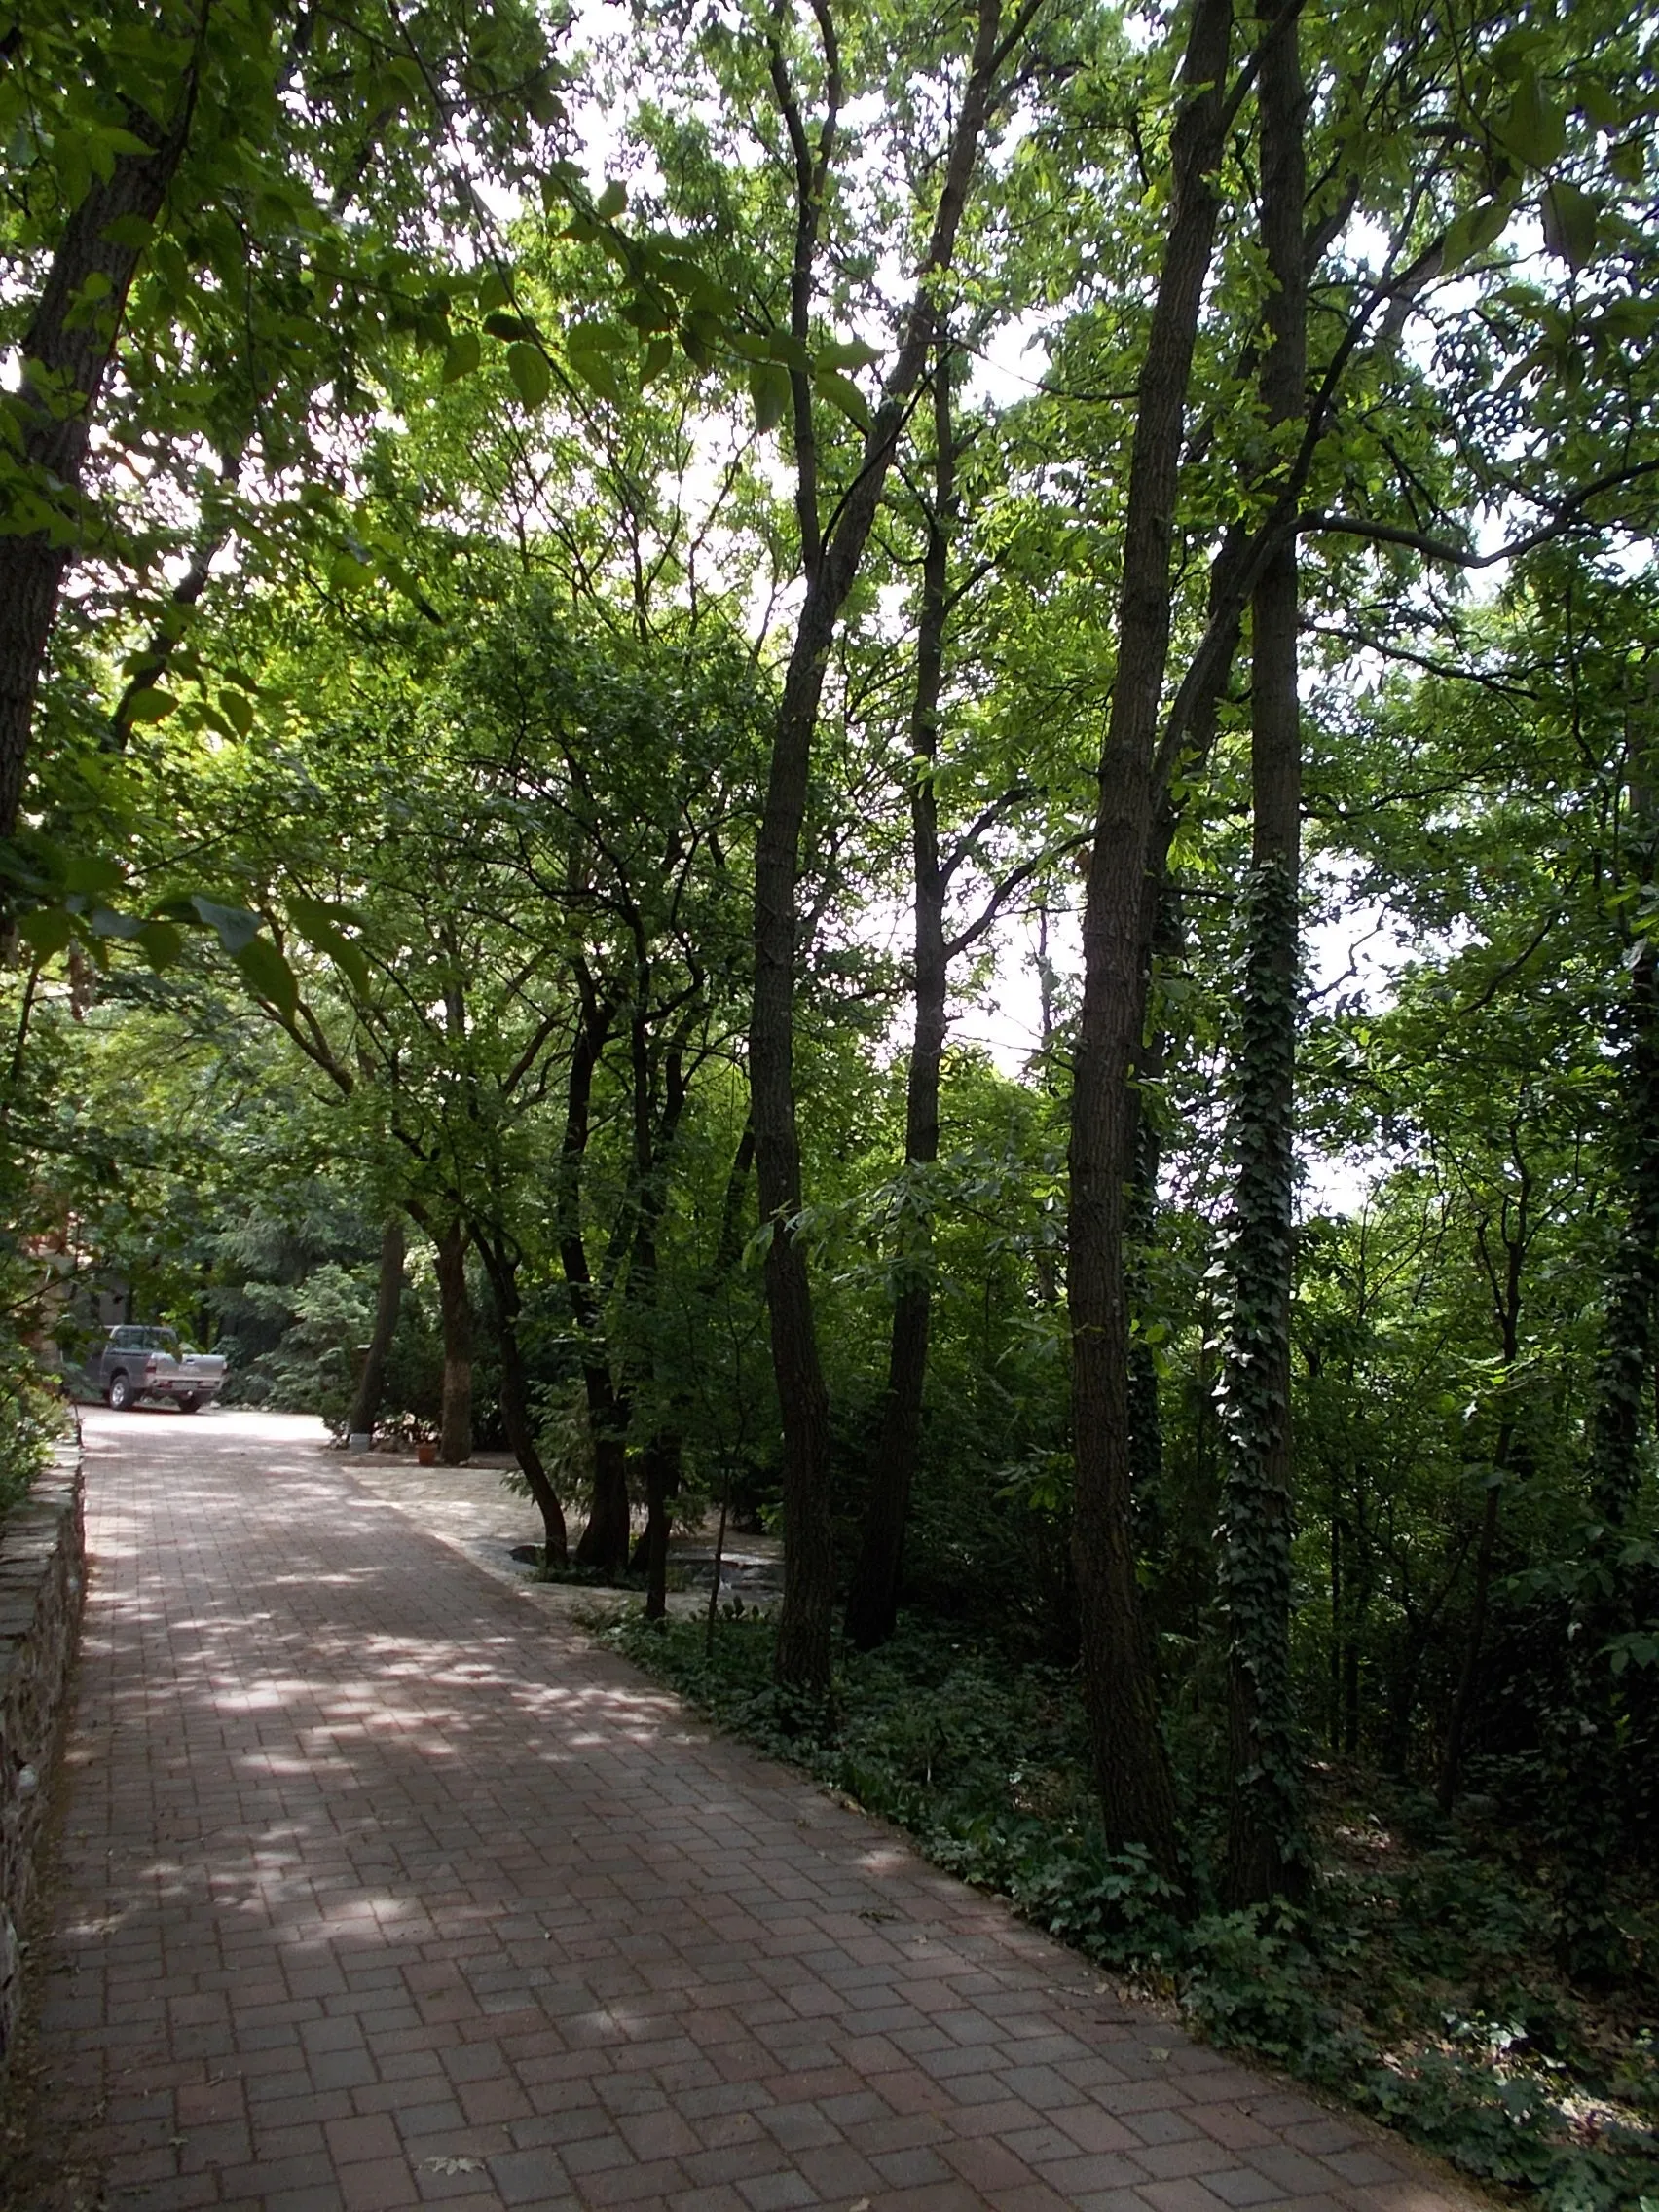 Photo showing: : Berza-kert (Berza Garden) protected natural area. Garden/forest road to the building. Visit by appointment - 8 Borostyán Street, Érdliget neighborhood, Érd, Pest County, Hungary.